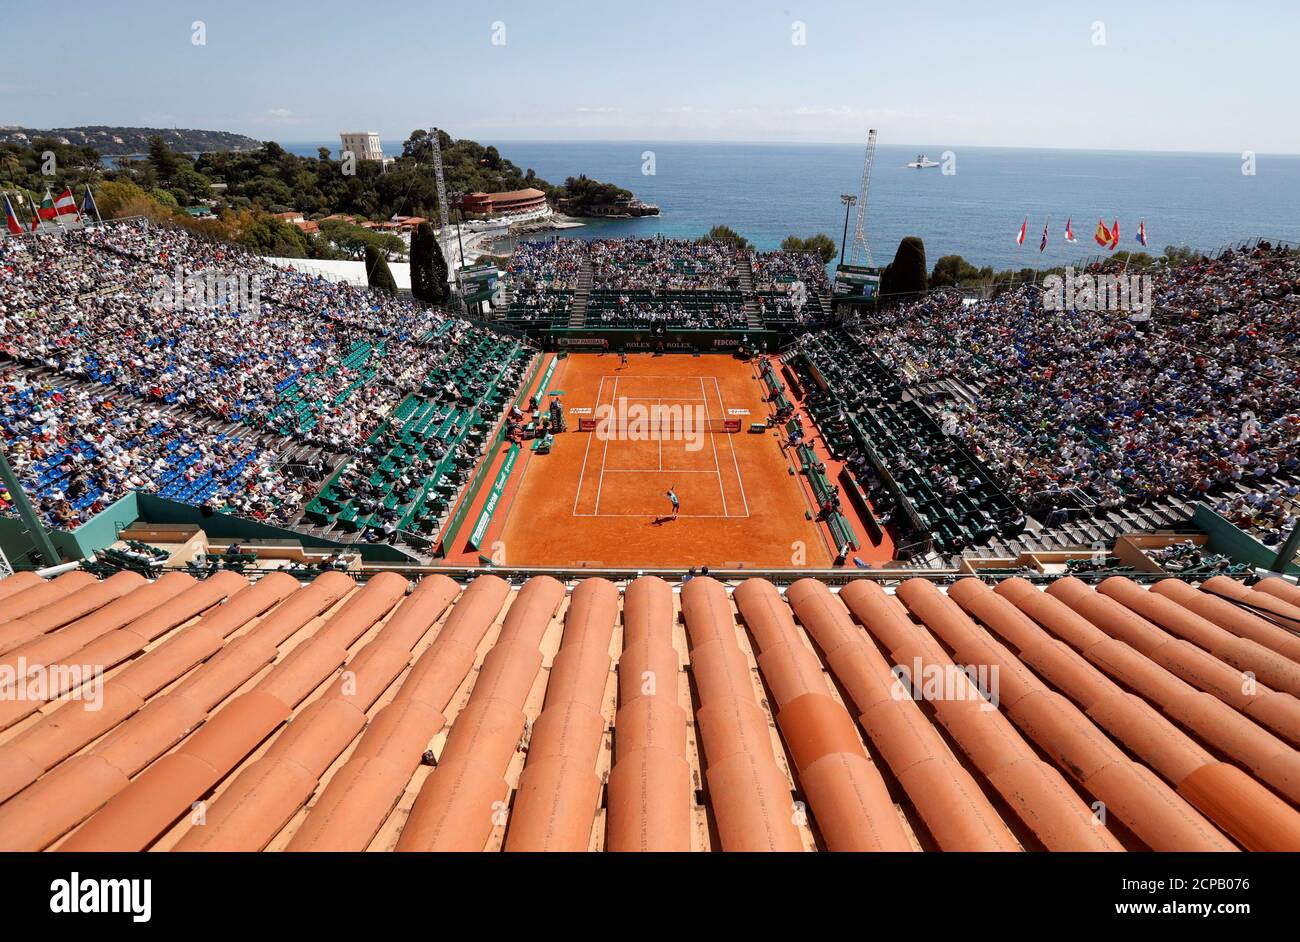 Tennis - Monte Carlo Masters - Monaco, 18/04/2017. A general view shows the  central court of the Monte Carlo Country Club during the match between  Jo-Wilfried Tsonga of France and his compatriot